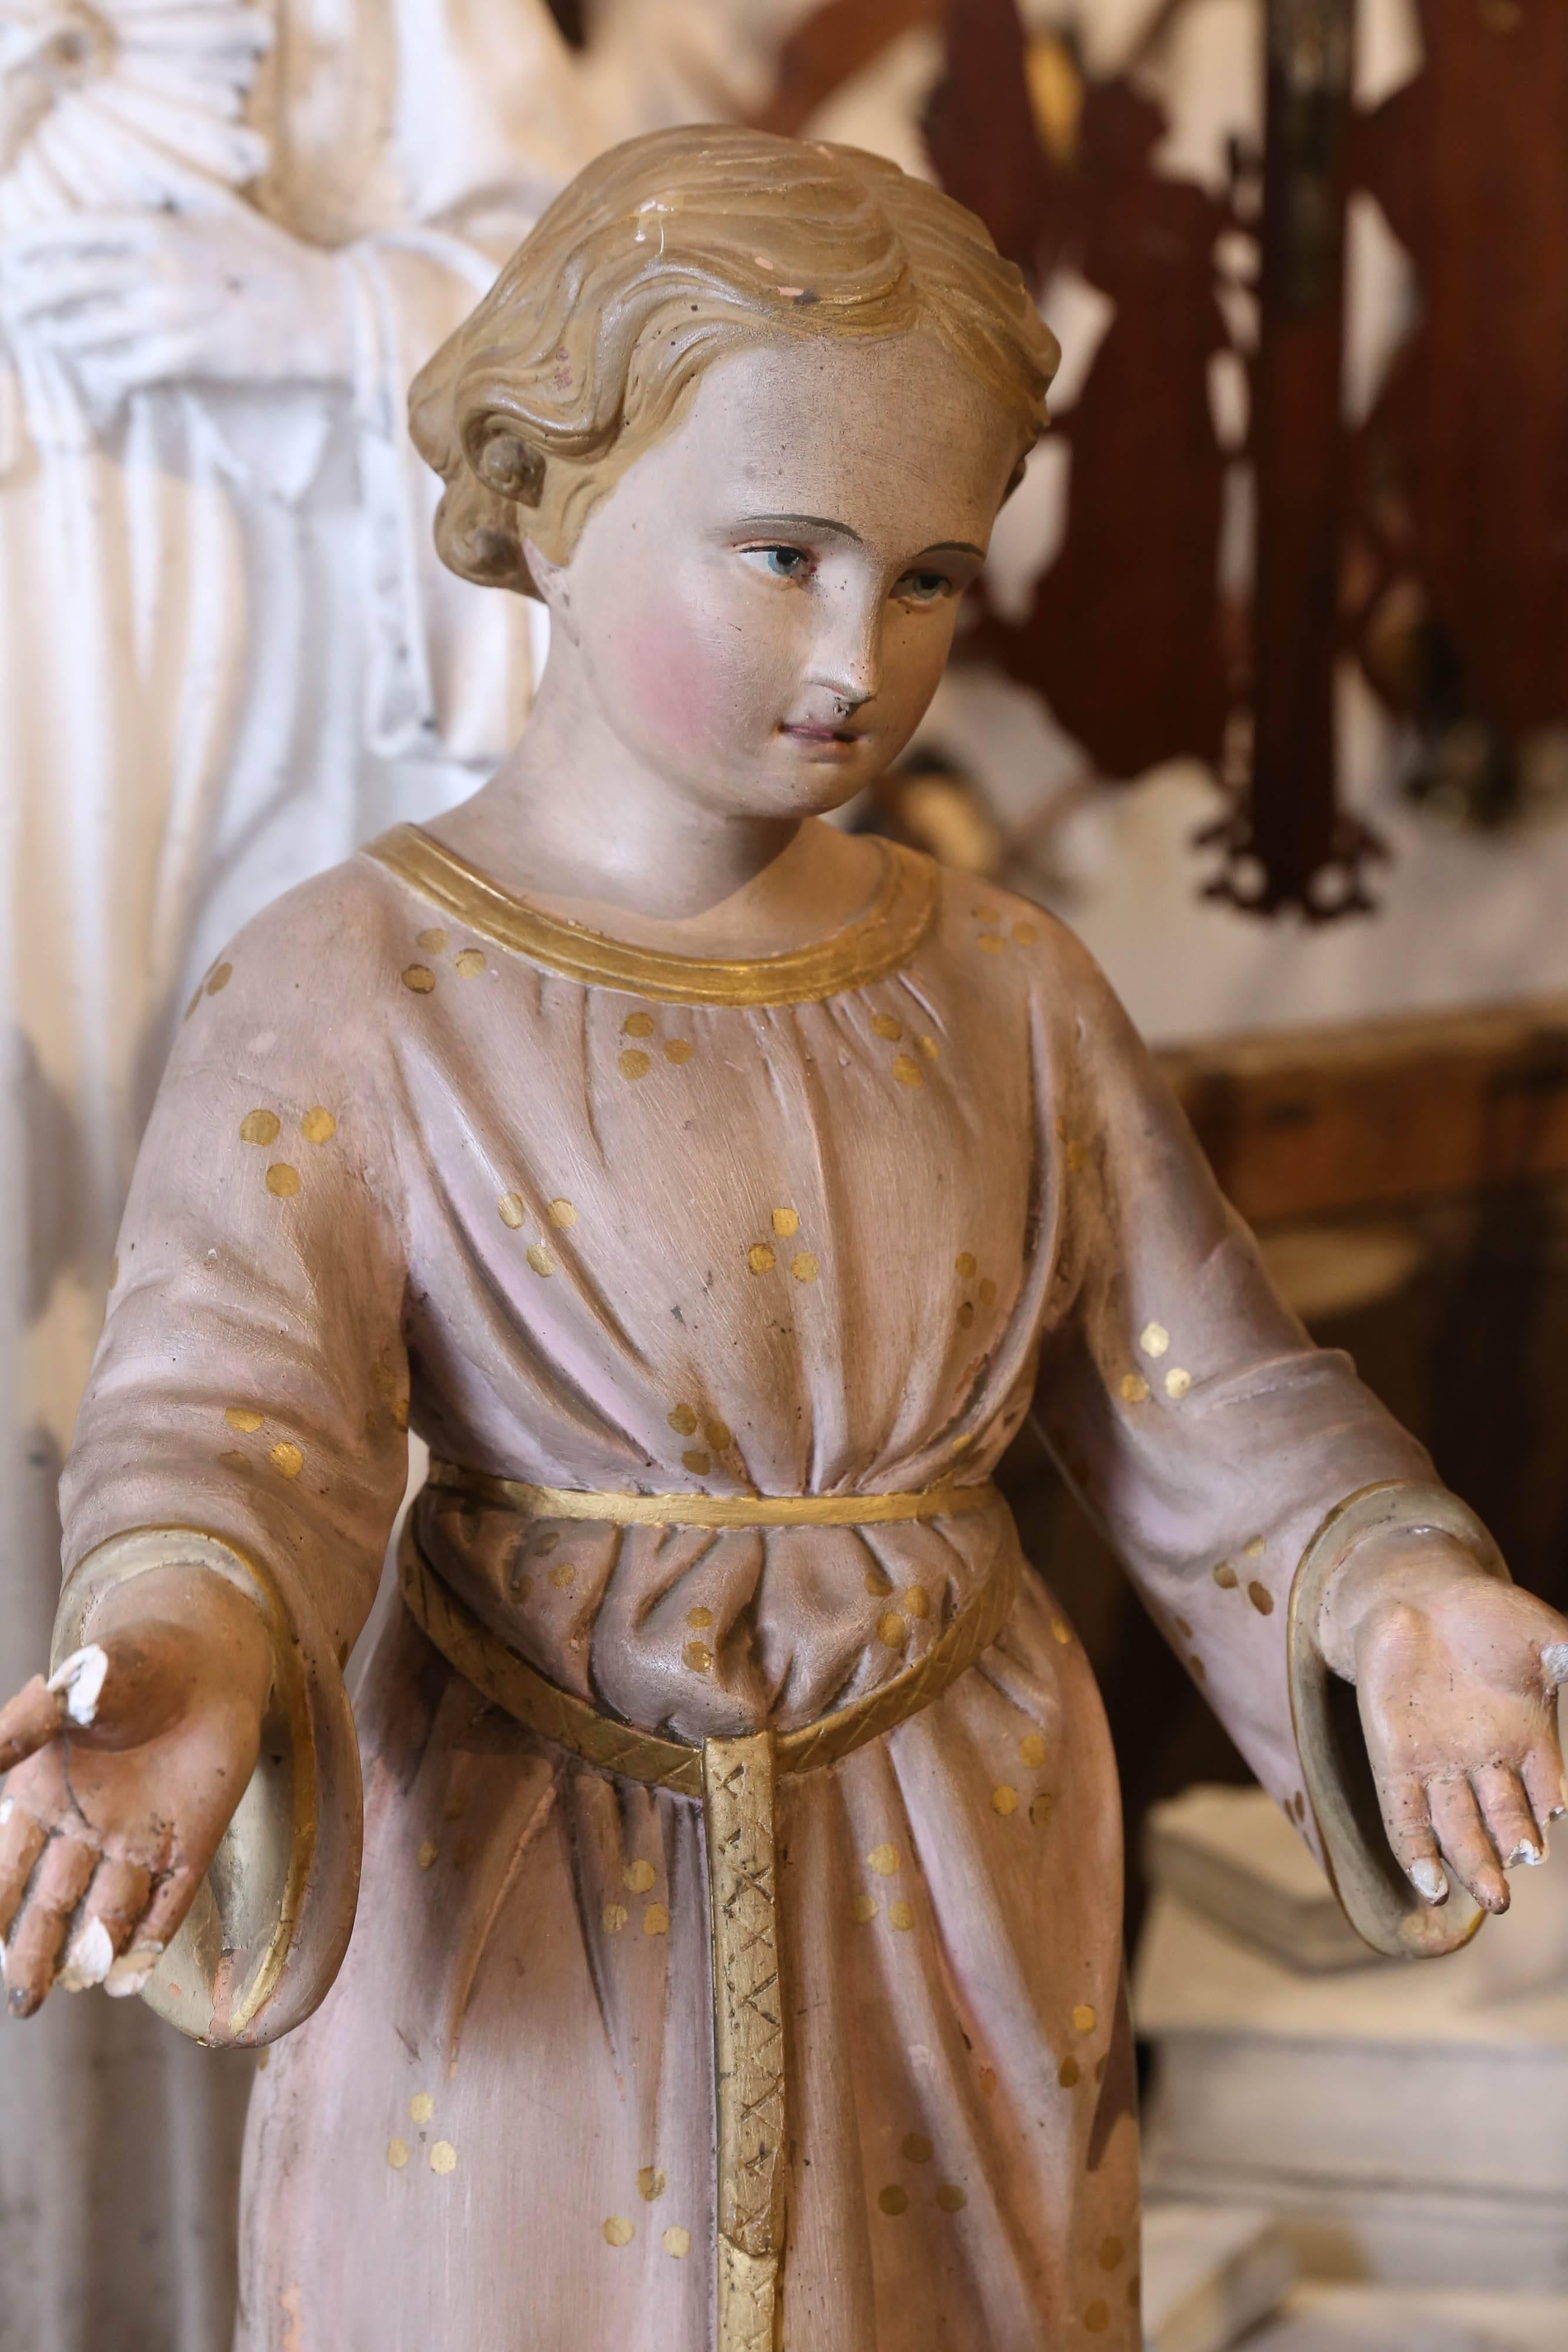 This plaster statue of Saint John is hand painted with lovely details such as the gilt pattern of his robes and delicate facial features. We sourced this piece in France and it is believed to date to around 1900. The robes are a muted dusty rose